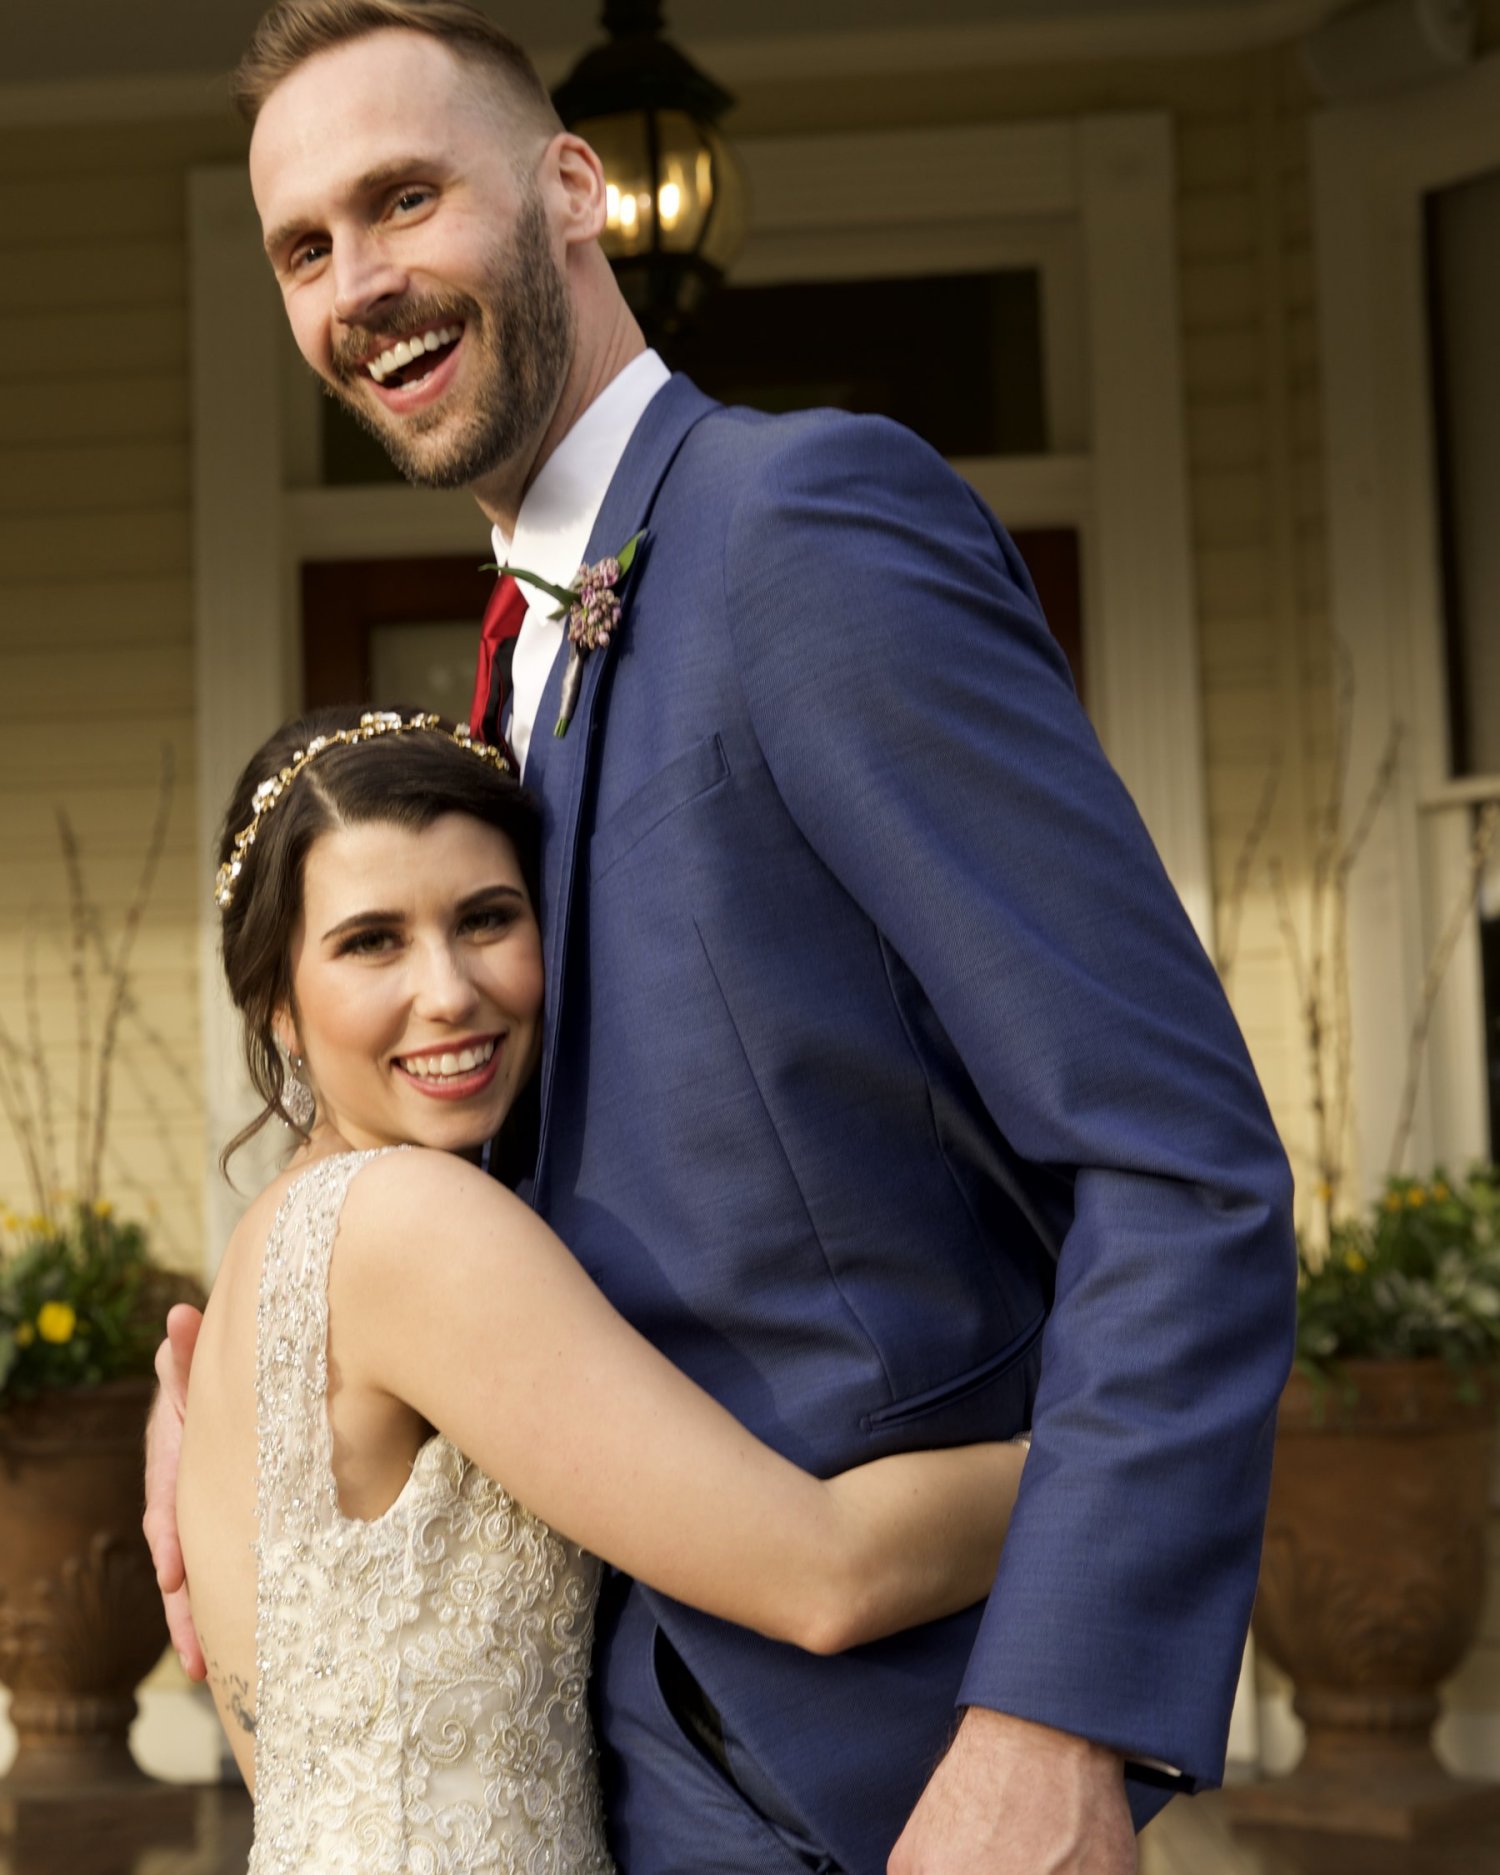 'Married at First Sight' Season 9 couples revealed by Lifetime Meet